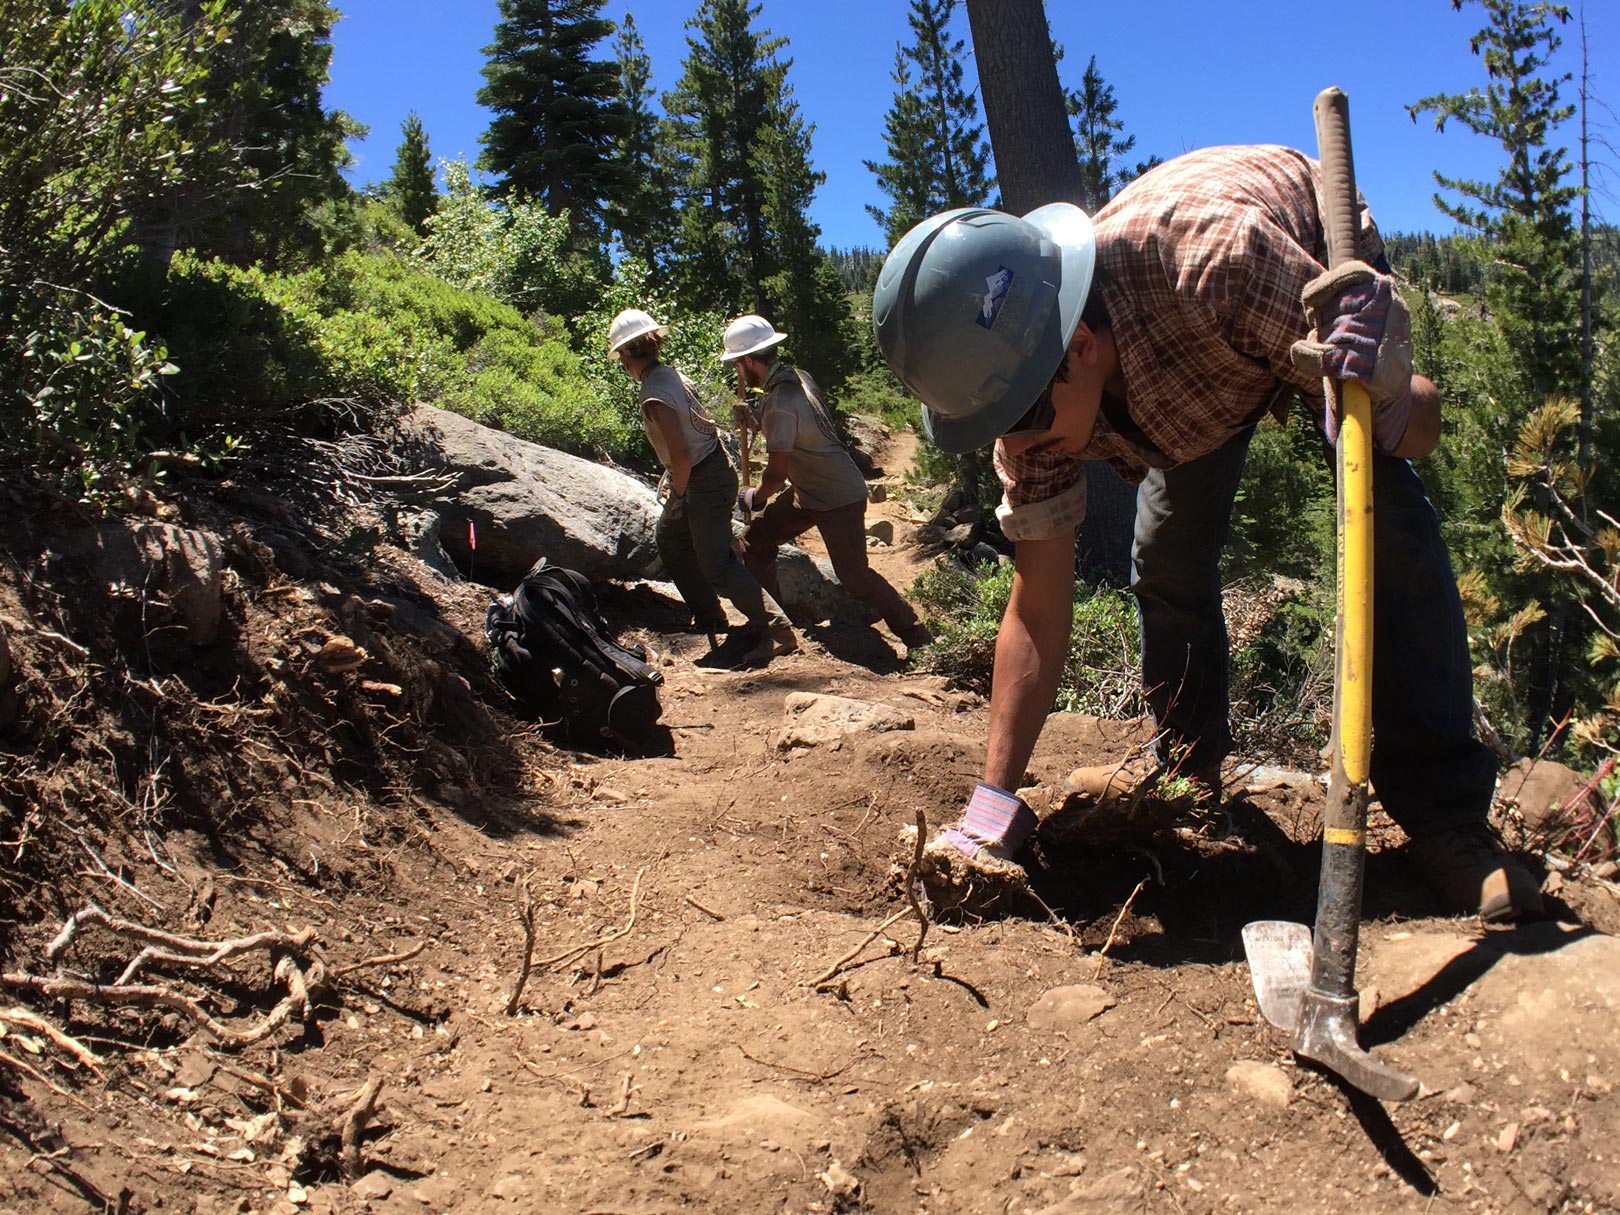 Building this new section of PCT involved multiple years of pulling roots and rocks out of the ground. Photo by Clare Major.